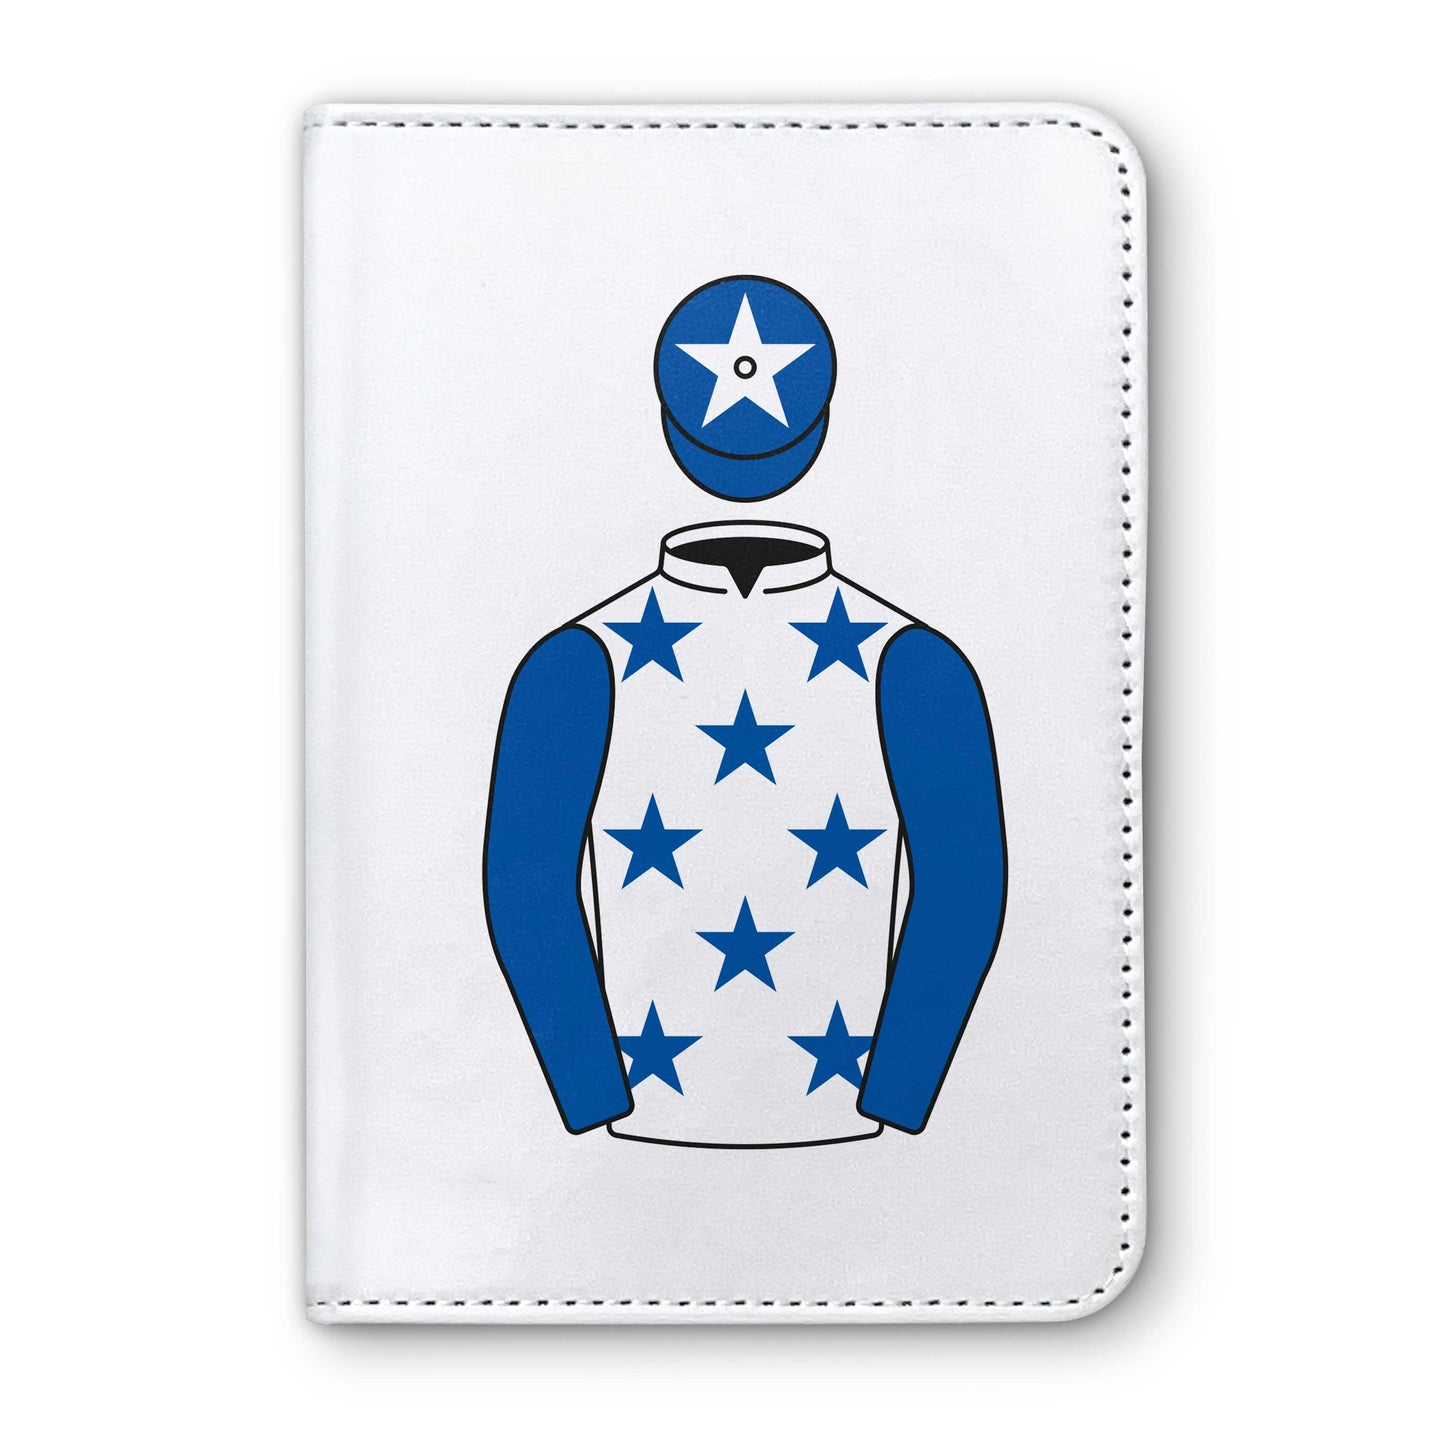 Coral Champions Club Horse Racing Passport Holder - Hacked Up Horse Racing Gifts